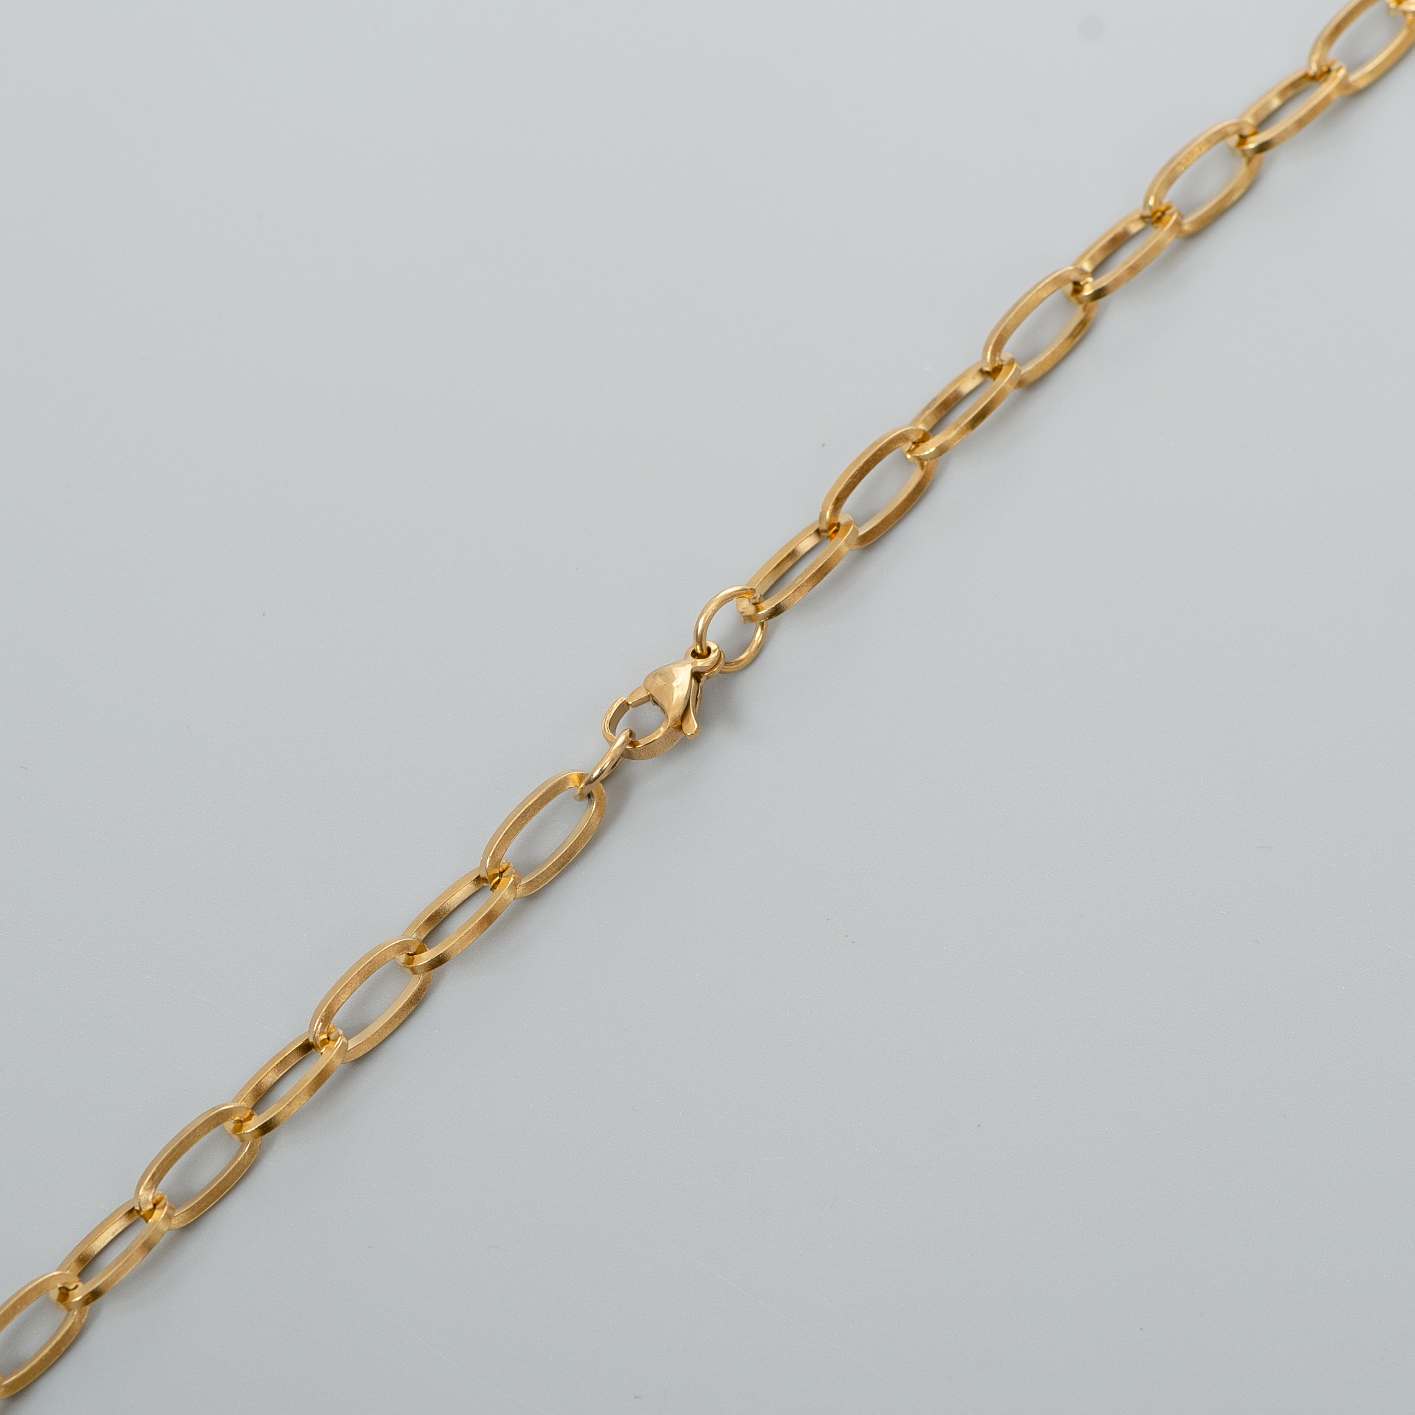 REGAL LINK 18K GOLD PLATED CHAIN